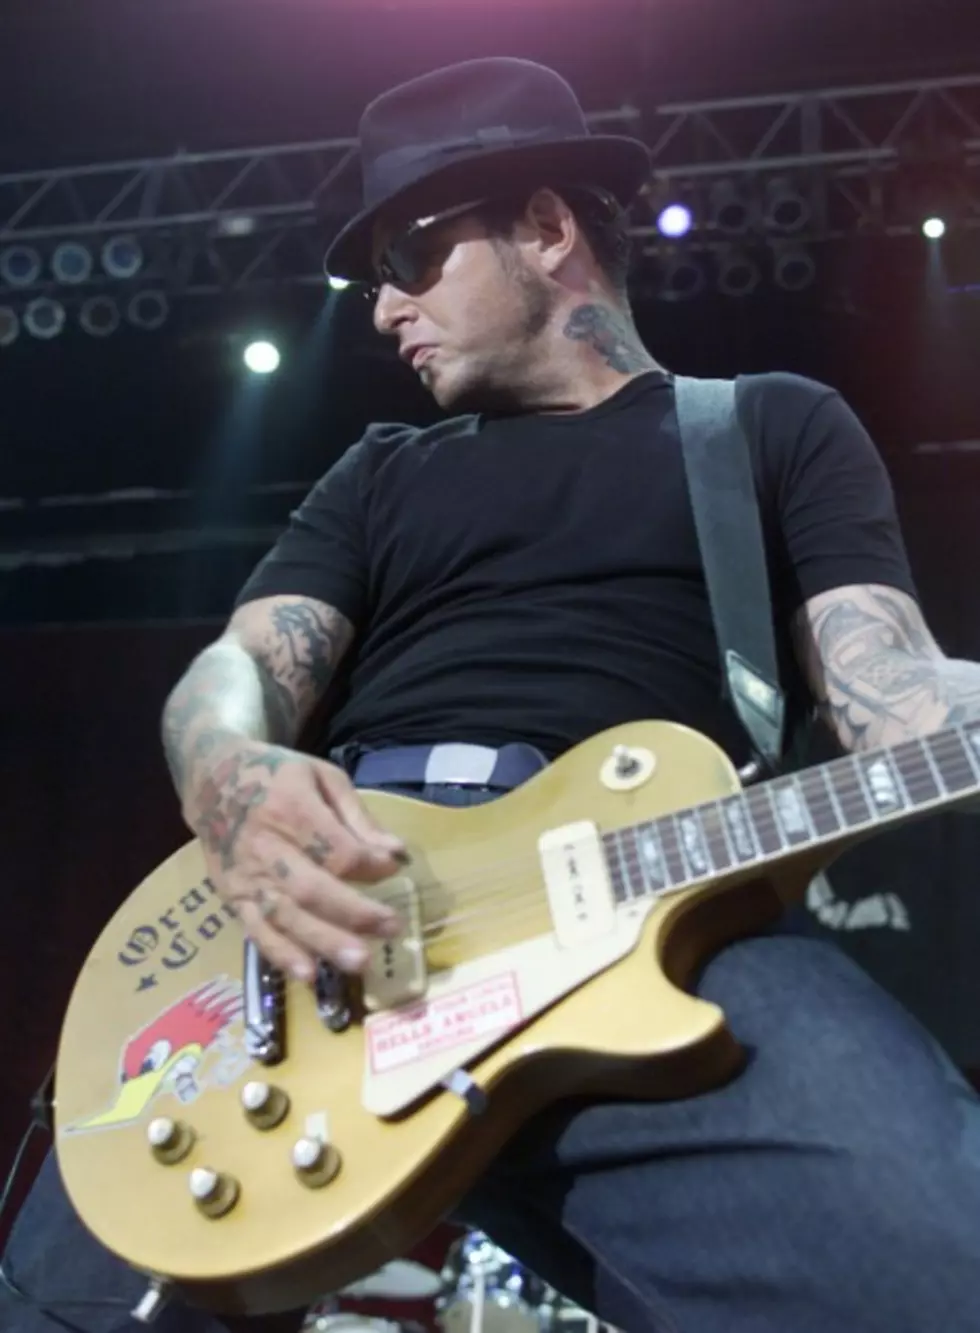 Mike Ness of Social Distortion Talks Tour, Book and New Record Projects [VIDEO]